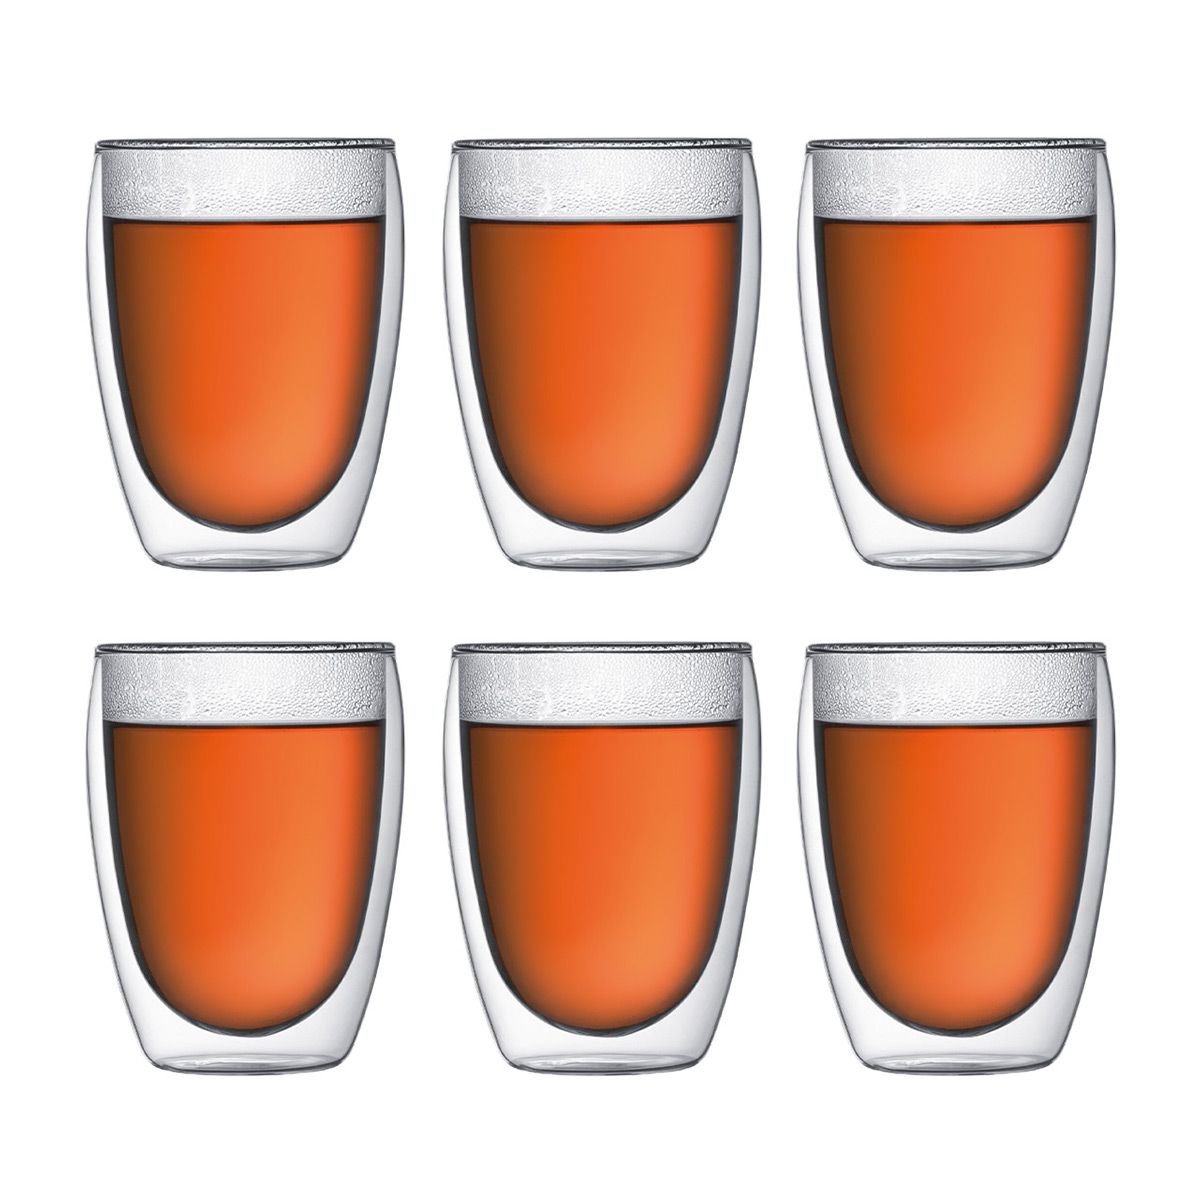 12oz Bodum Pavina Double-Wall Glasses: 6-Count $27 or 2-Count $13.50 + Free S&H on $25+ at Bodum